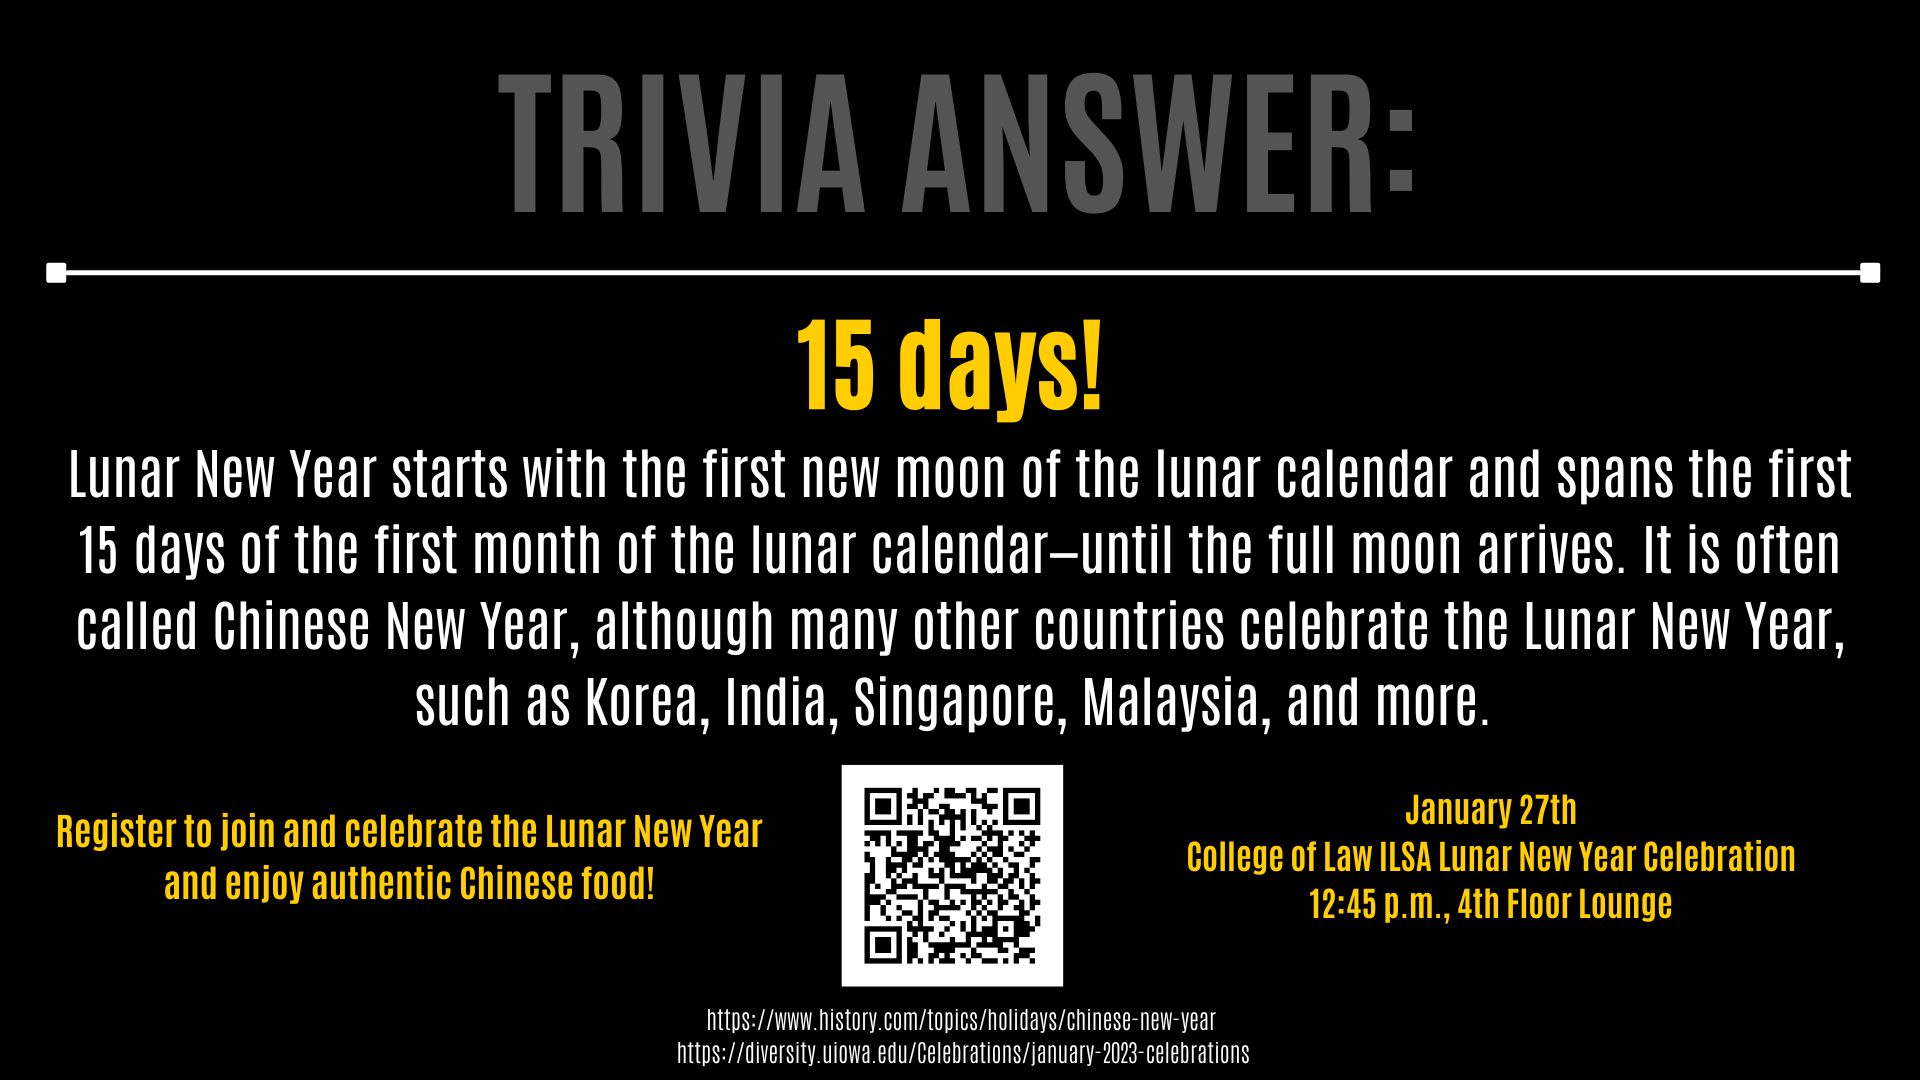 Trivia Answer: 15 days!  Lunar New Year starts with the first new moon of the lunar calendar and spans the first 15 days of the first month of the lunar calendar—until the full moon arrives. It is often called Chinese New Year, although many other countries celebrate the Lunar New Year, such as Korea, India, Singapore, Malaysia, and more.  Register to join and celebrate the Lunar New Year  and enjoy authentic Chinese food! January 27th College of Law ILSA Lunar New Year Celebration 12:45 p.m., 4th Floor Lounge